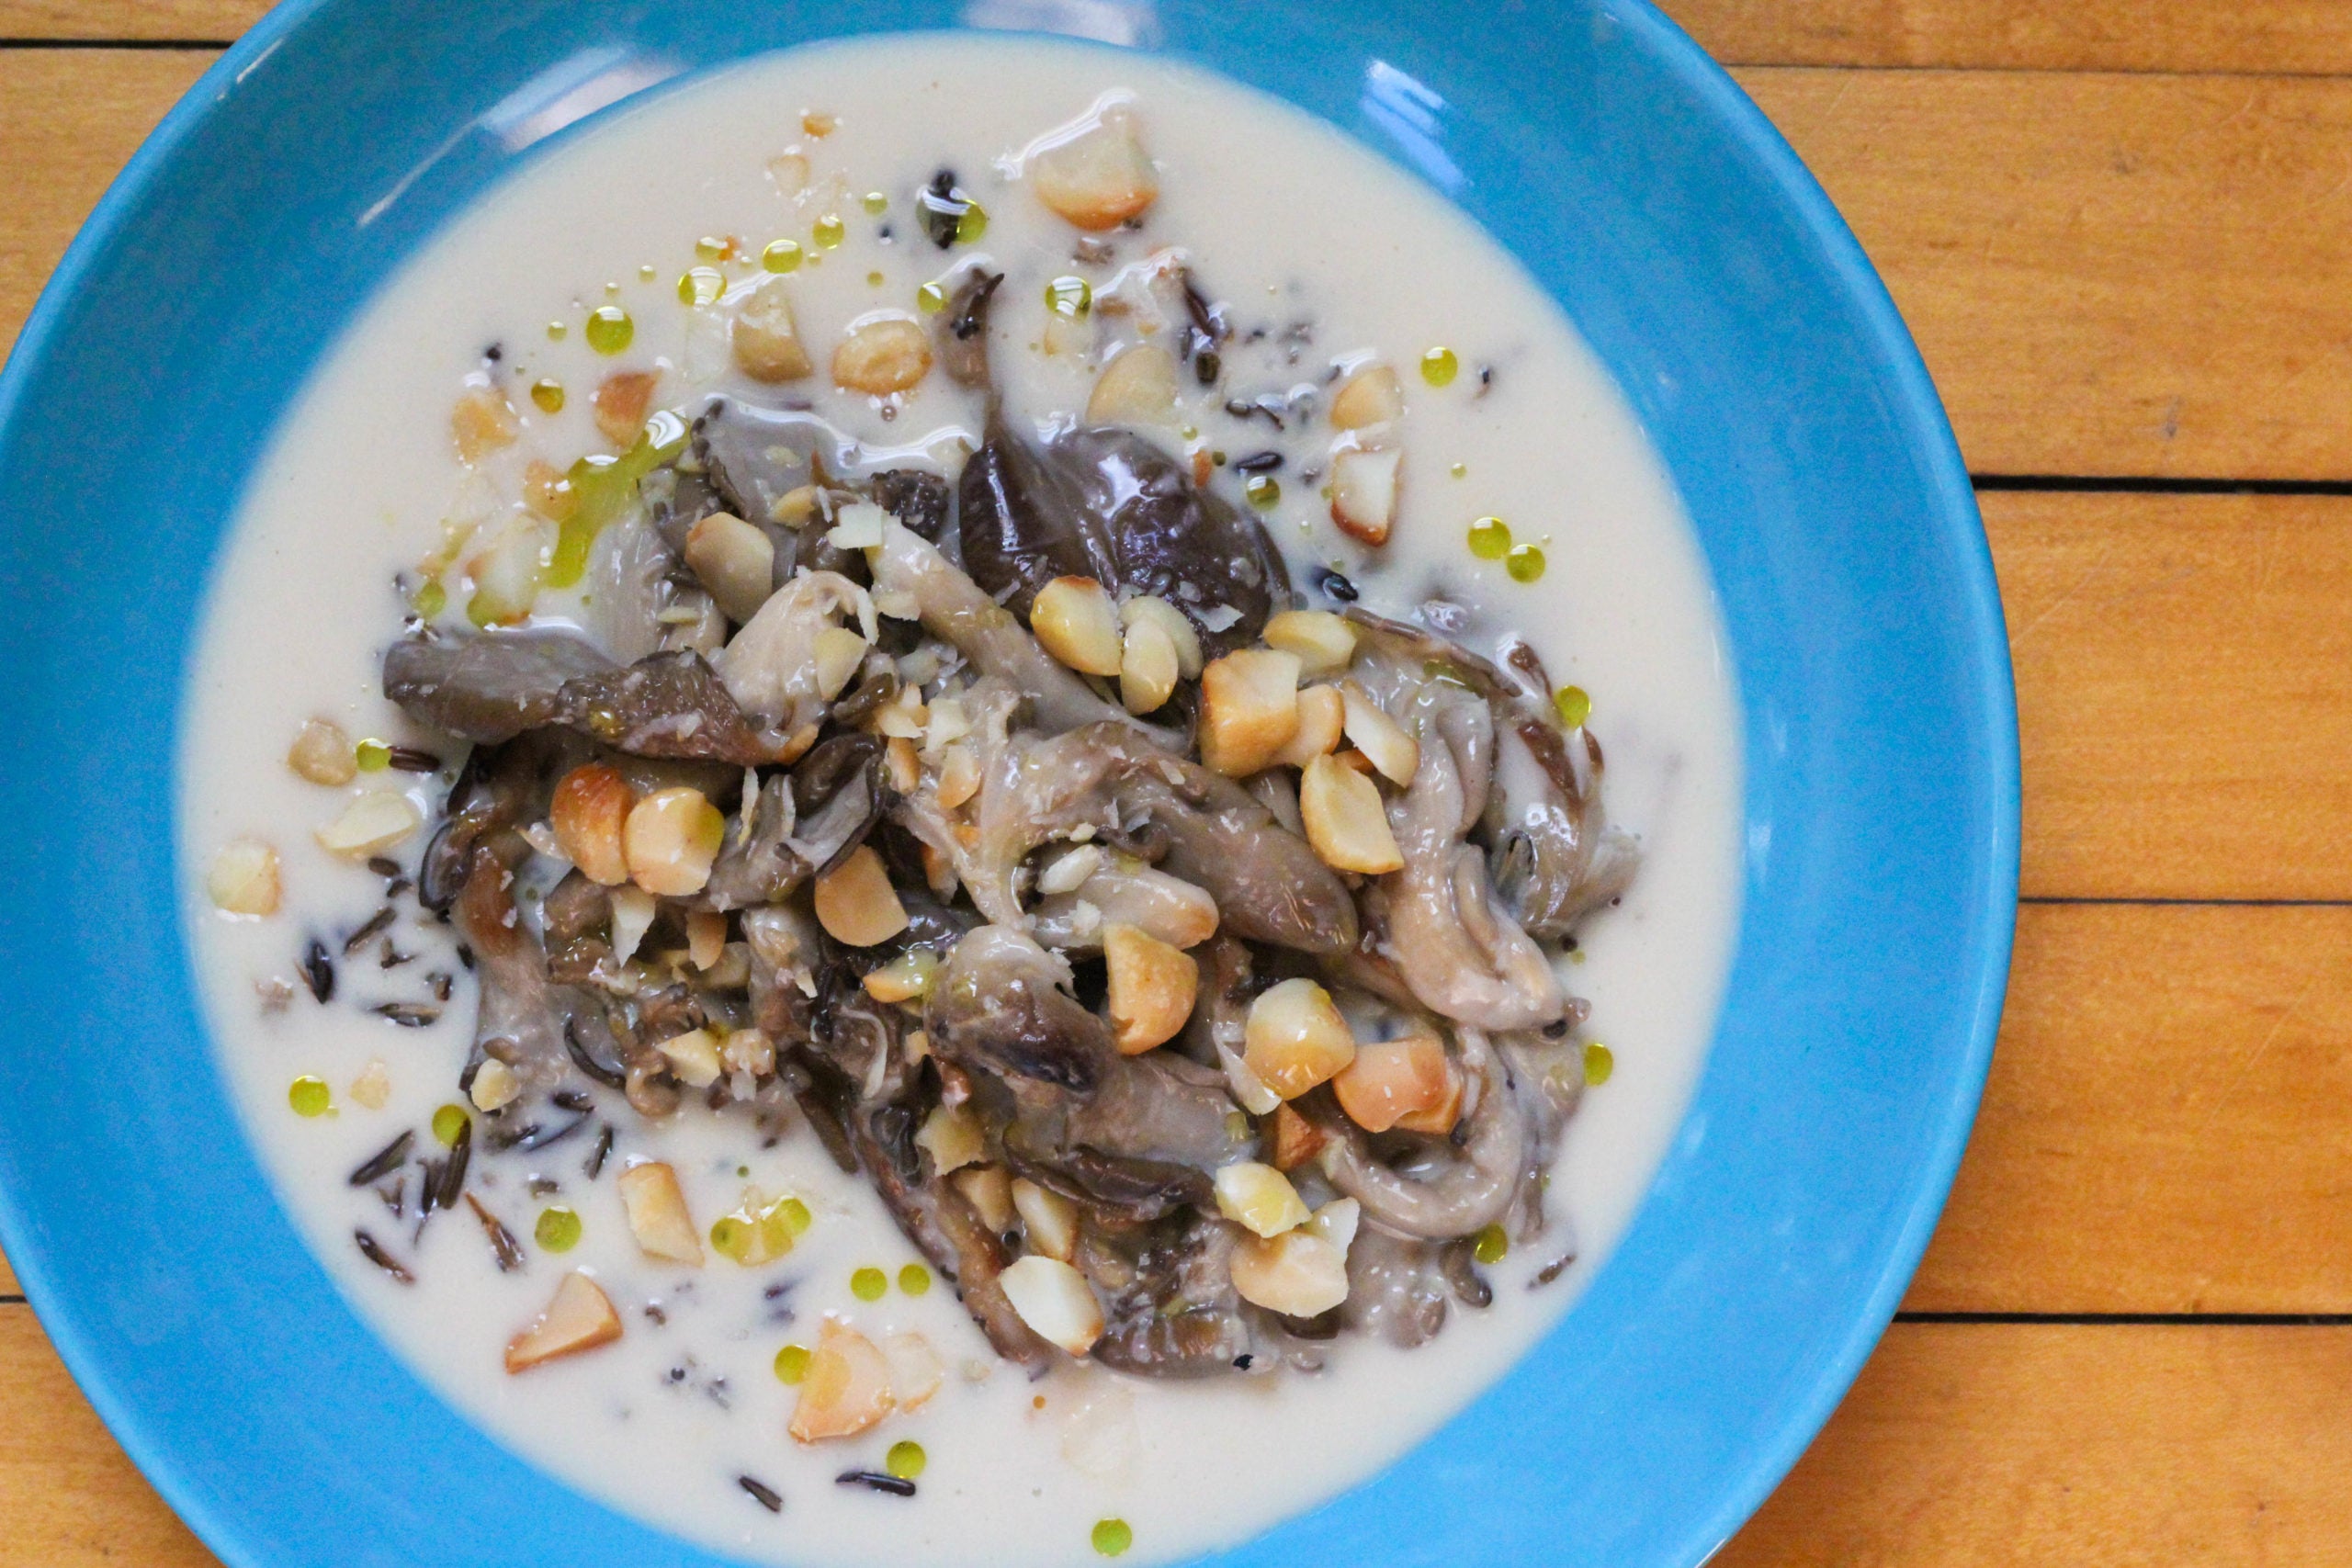 Braised Oyster Mushrooms, Coconut, and Macadamia nuts in a blue bowl